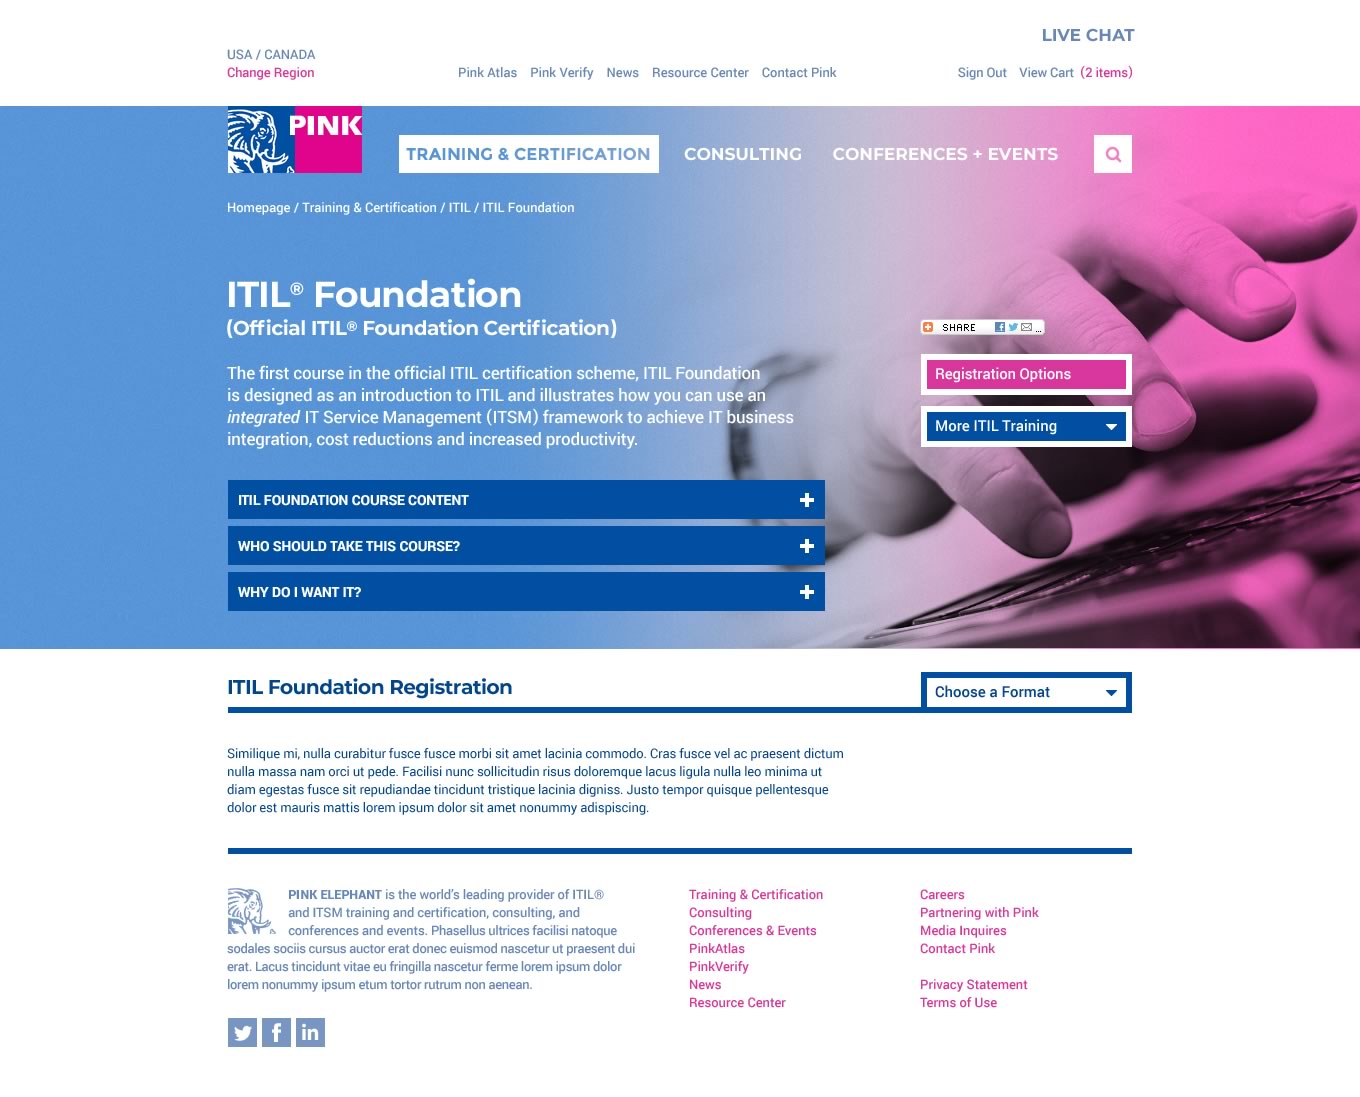 Capture of the full 'ITIL Foundation' page from the Pink Elephant website (Collapsed)